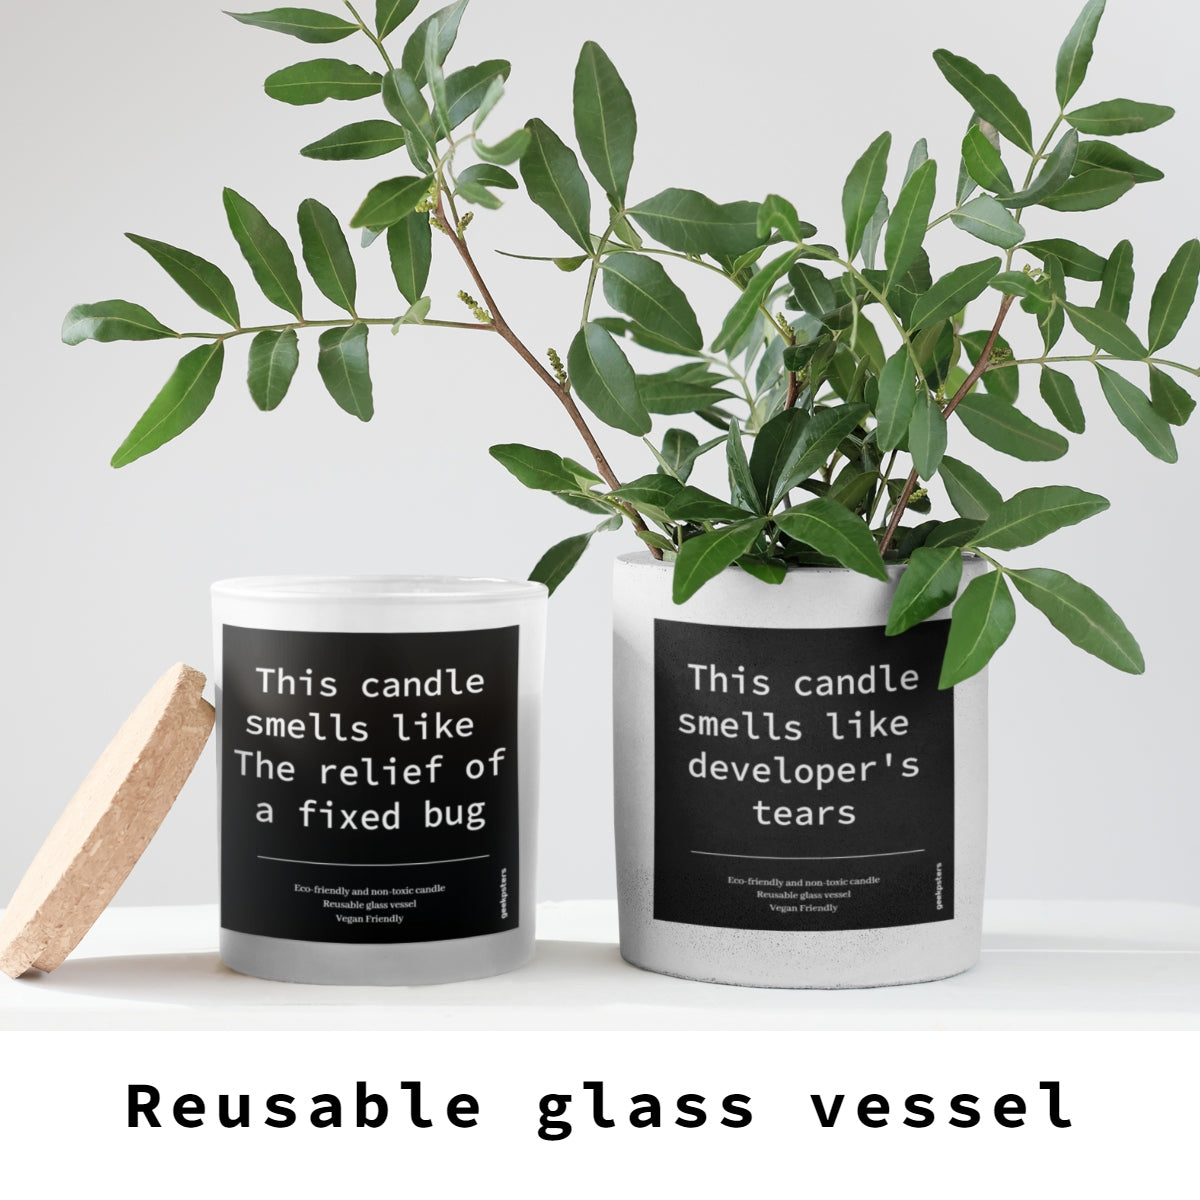 Two "This Candle Smells Like the Documentation Nobody Reads" scented soy candles in reusable glass jars with humorous labels, next to a green plant and wooden element, on a light background.